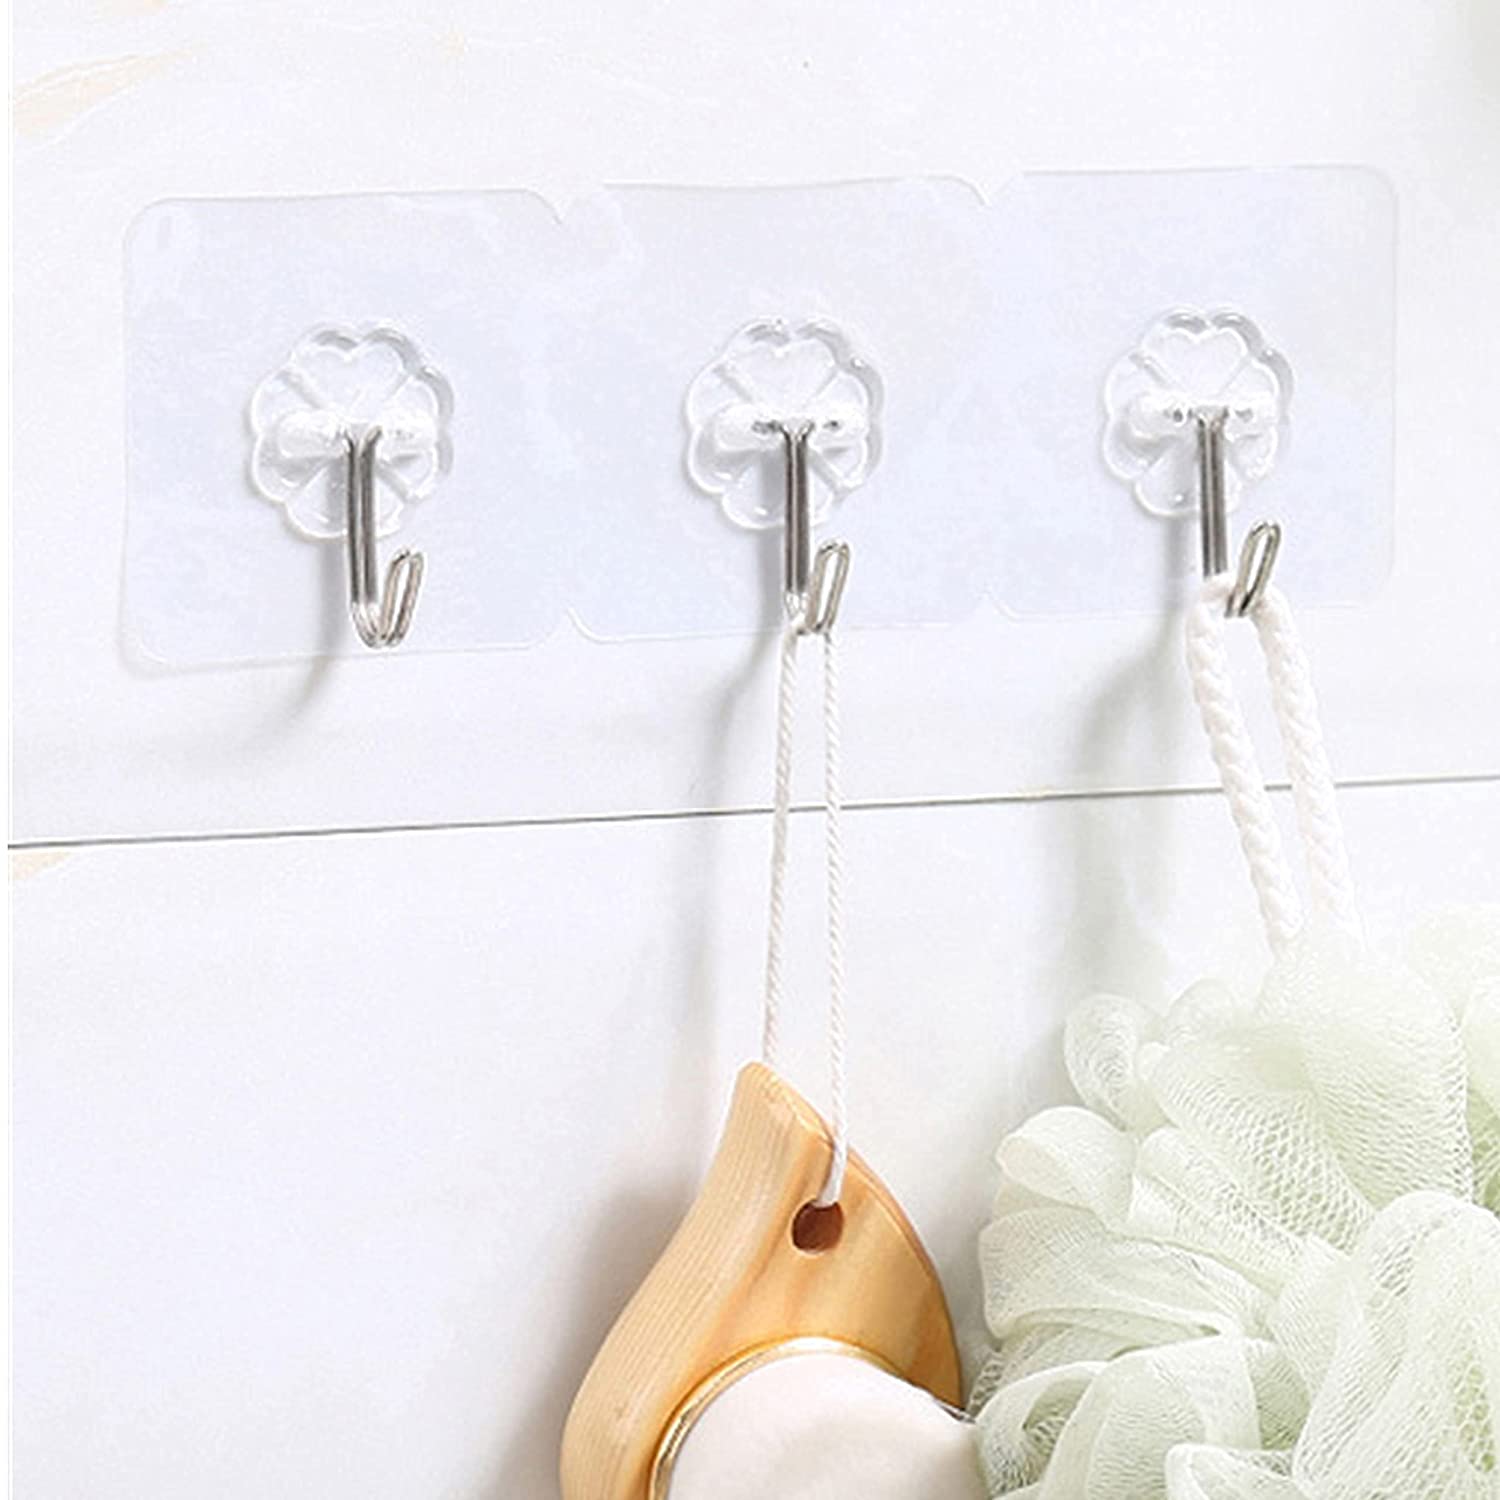  Alipis 20pcs No Punching Sticky Hook Plastic Hooks for Hanging  Plastic Clothes Hanger Jacket Hanger Coat Hook Wall Hooks Adhesive Garment  Rack Heavy Duty Non-Marking Hook Simple Wall Hook : Home